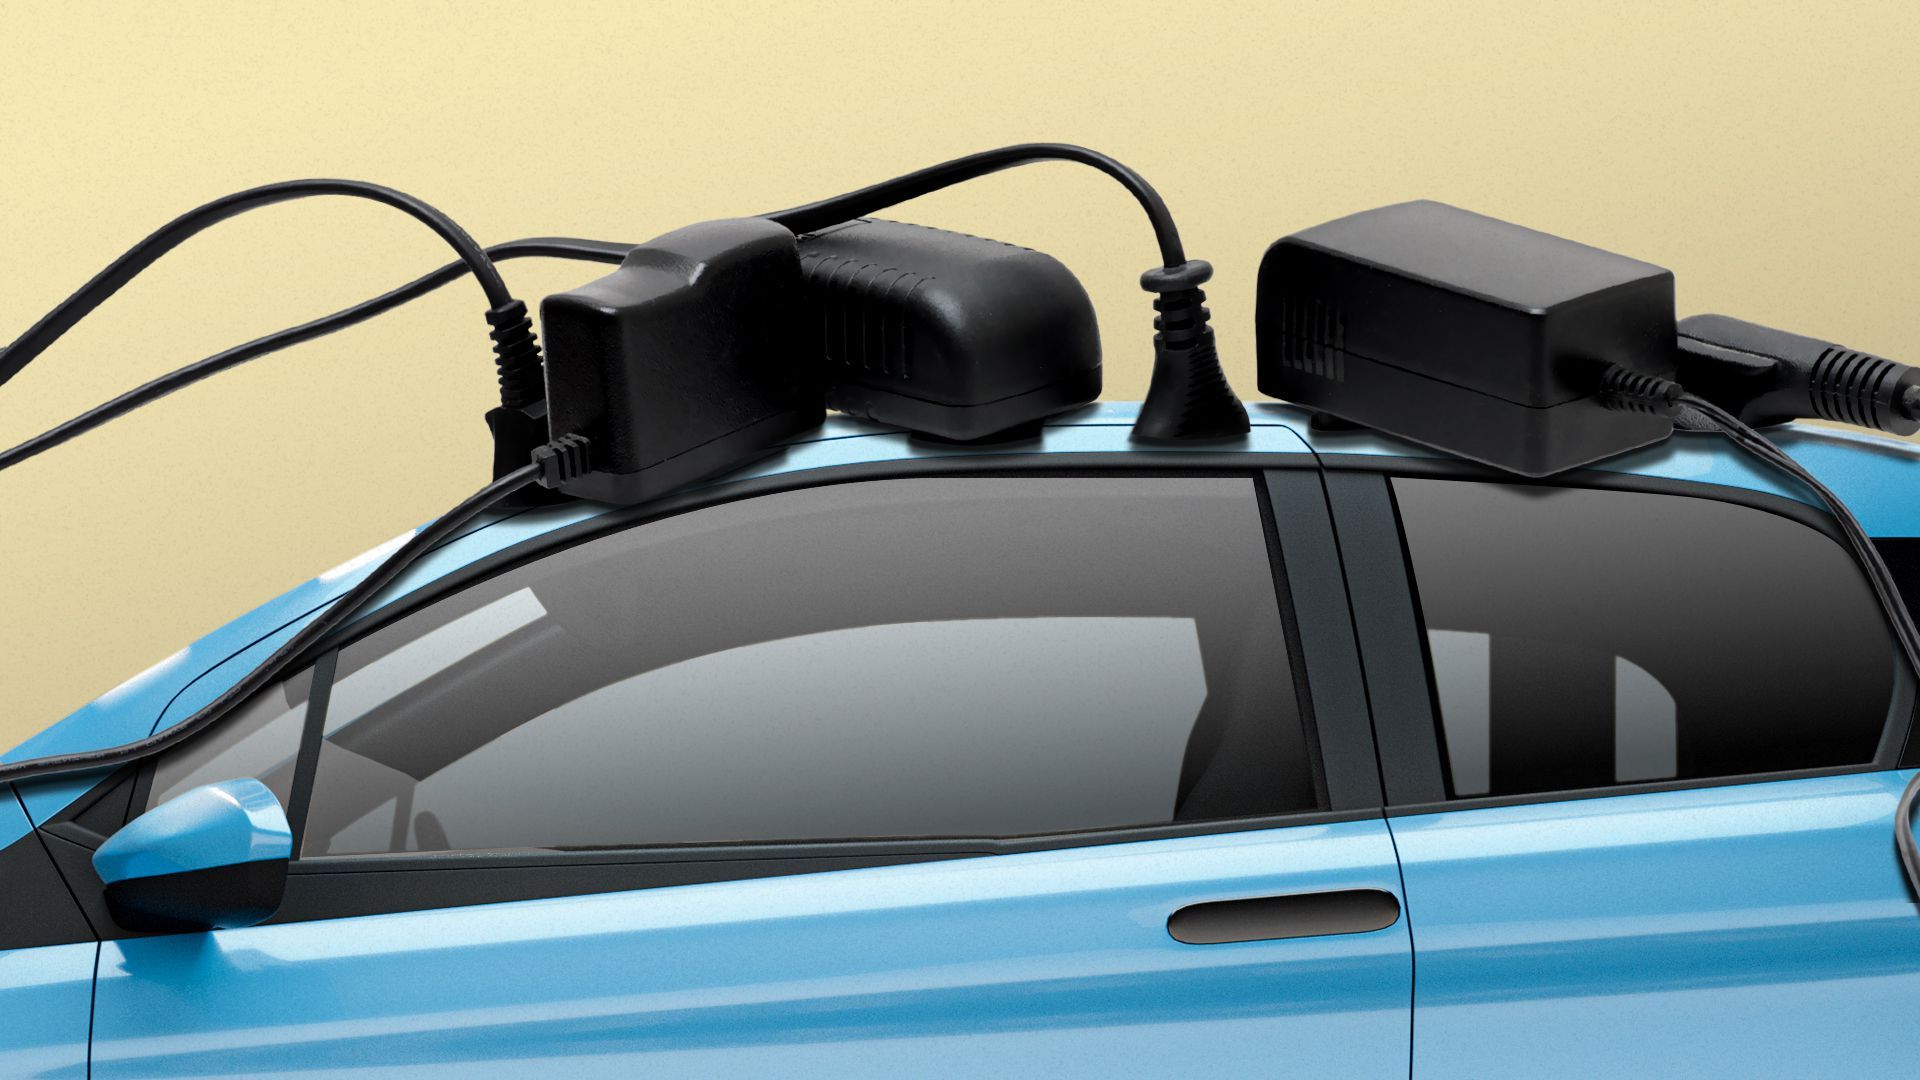 Illustration of six different cords plugged into the roof of an electric car.